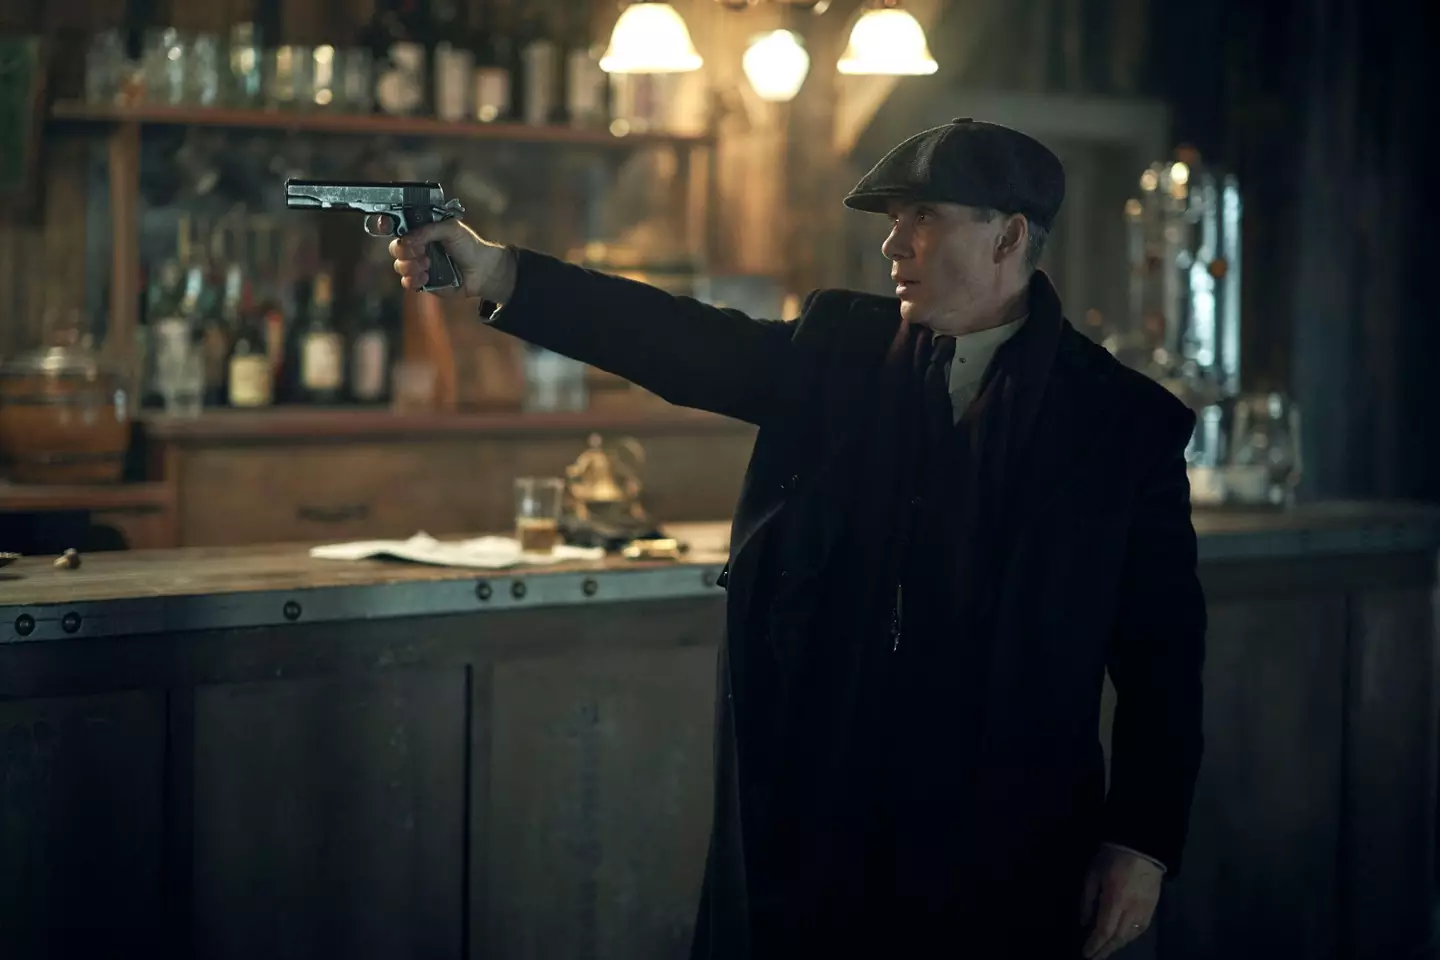 Tommy is expected to remain popular thanks to Peaky Blinders.